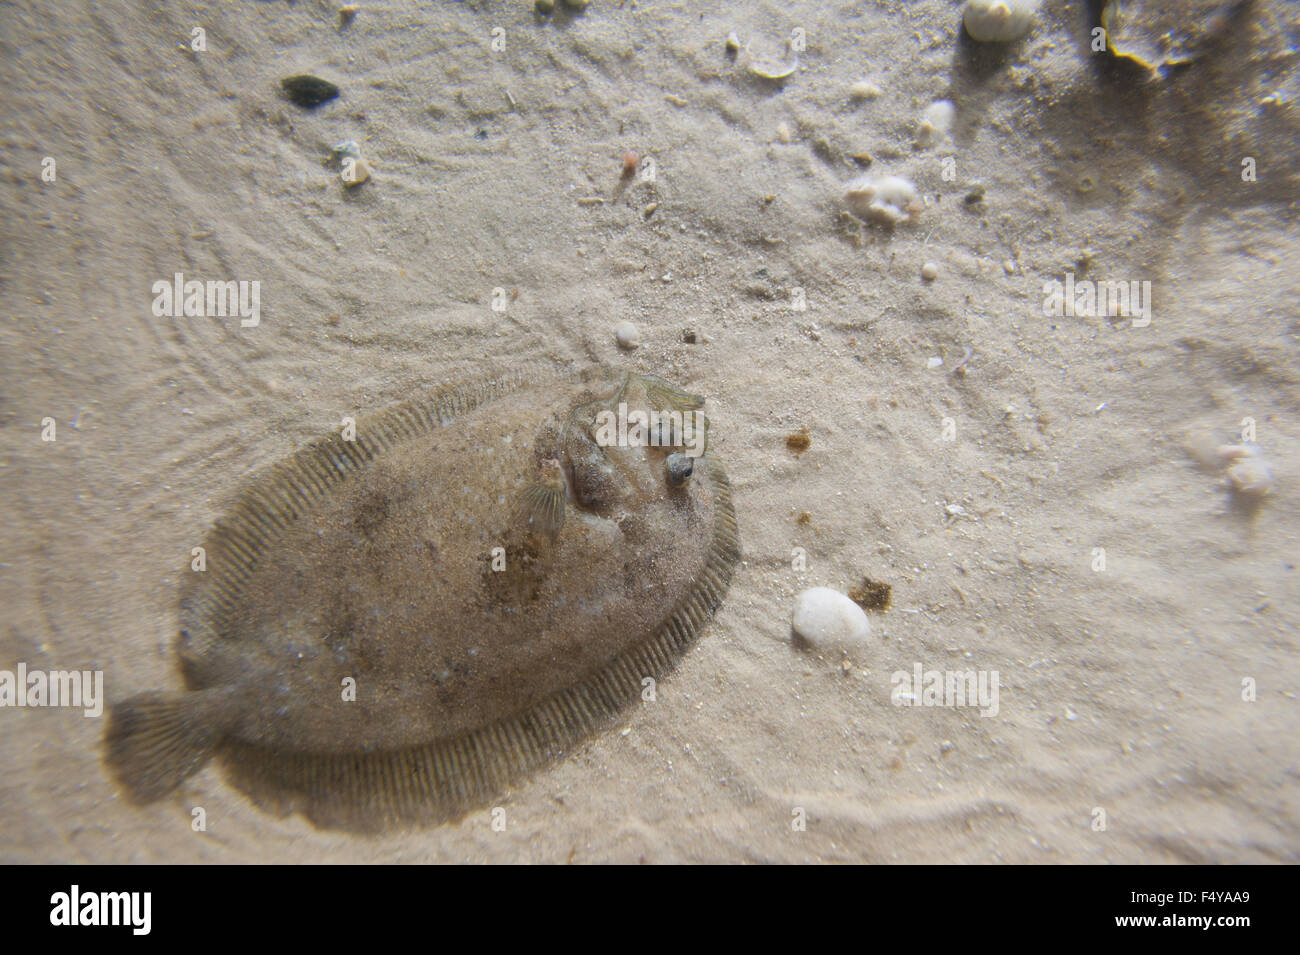 https://c8.alamy.com/comp/F4YAA9/flat-flounder-fish-blending-in-with-the-seabed-and-sand-hugging-close-F4YAA9.jpg